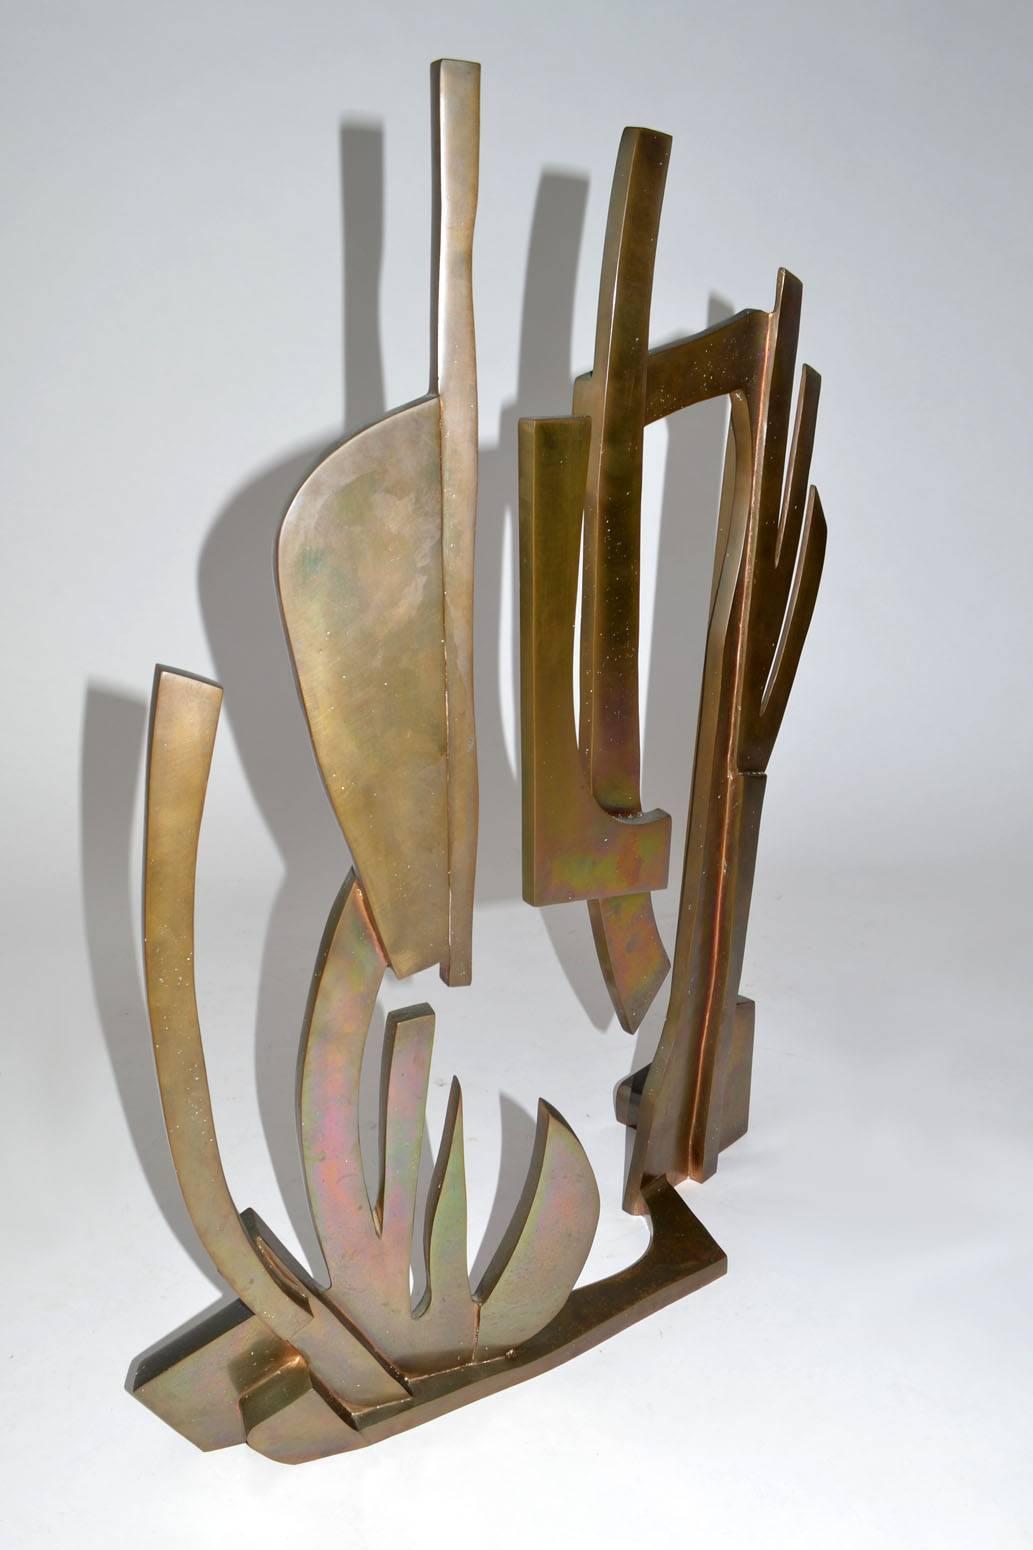 American Large Modern Abstract Bronze Sculpture by Oded Halahmy, New York, 1977